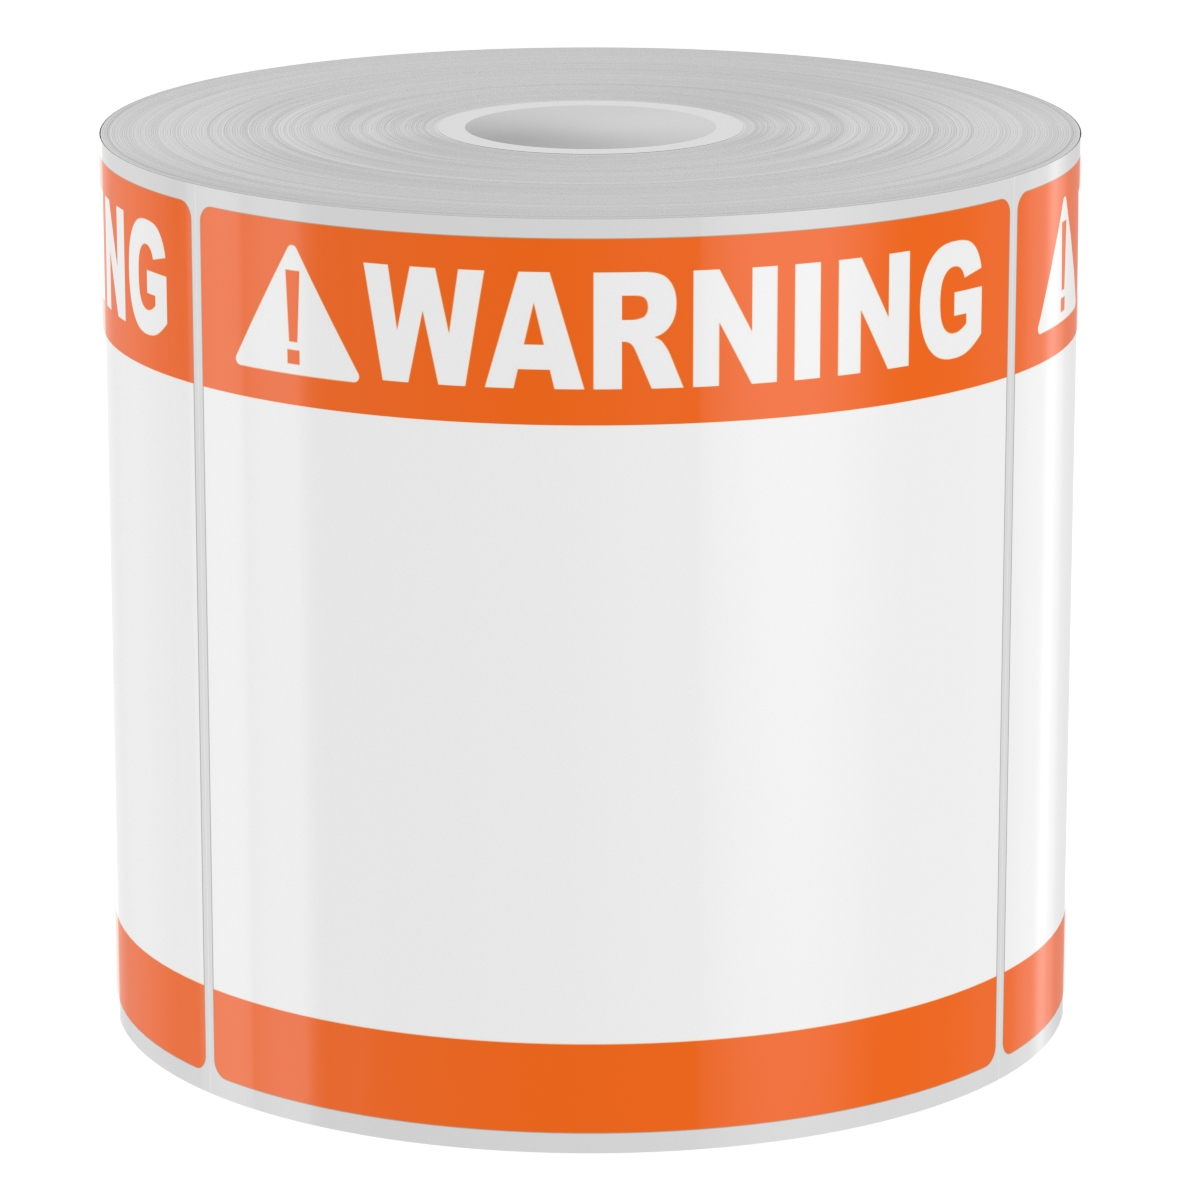 Detail view for 250 4" x 4" High-Performance Die-Cut Orange with White Warning Double Band